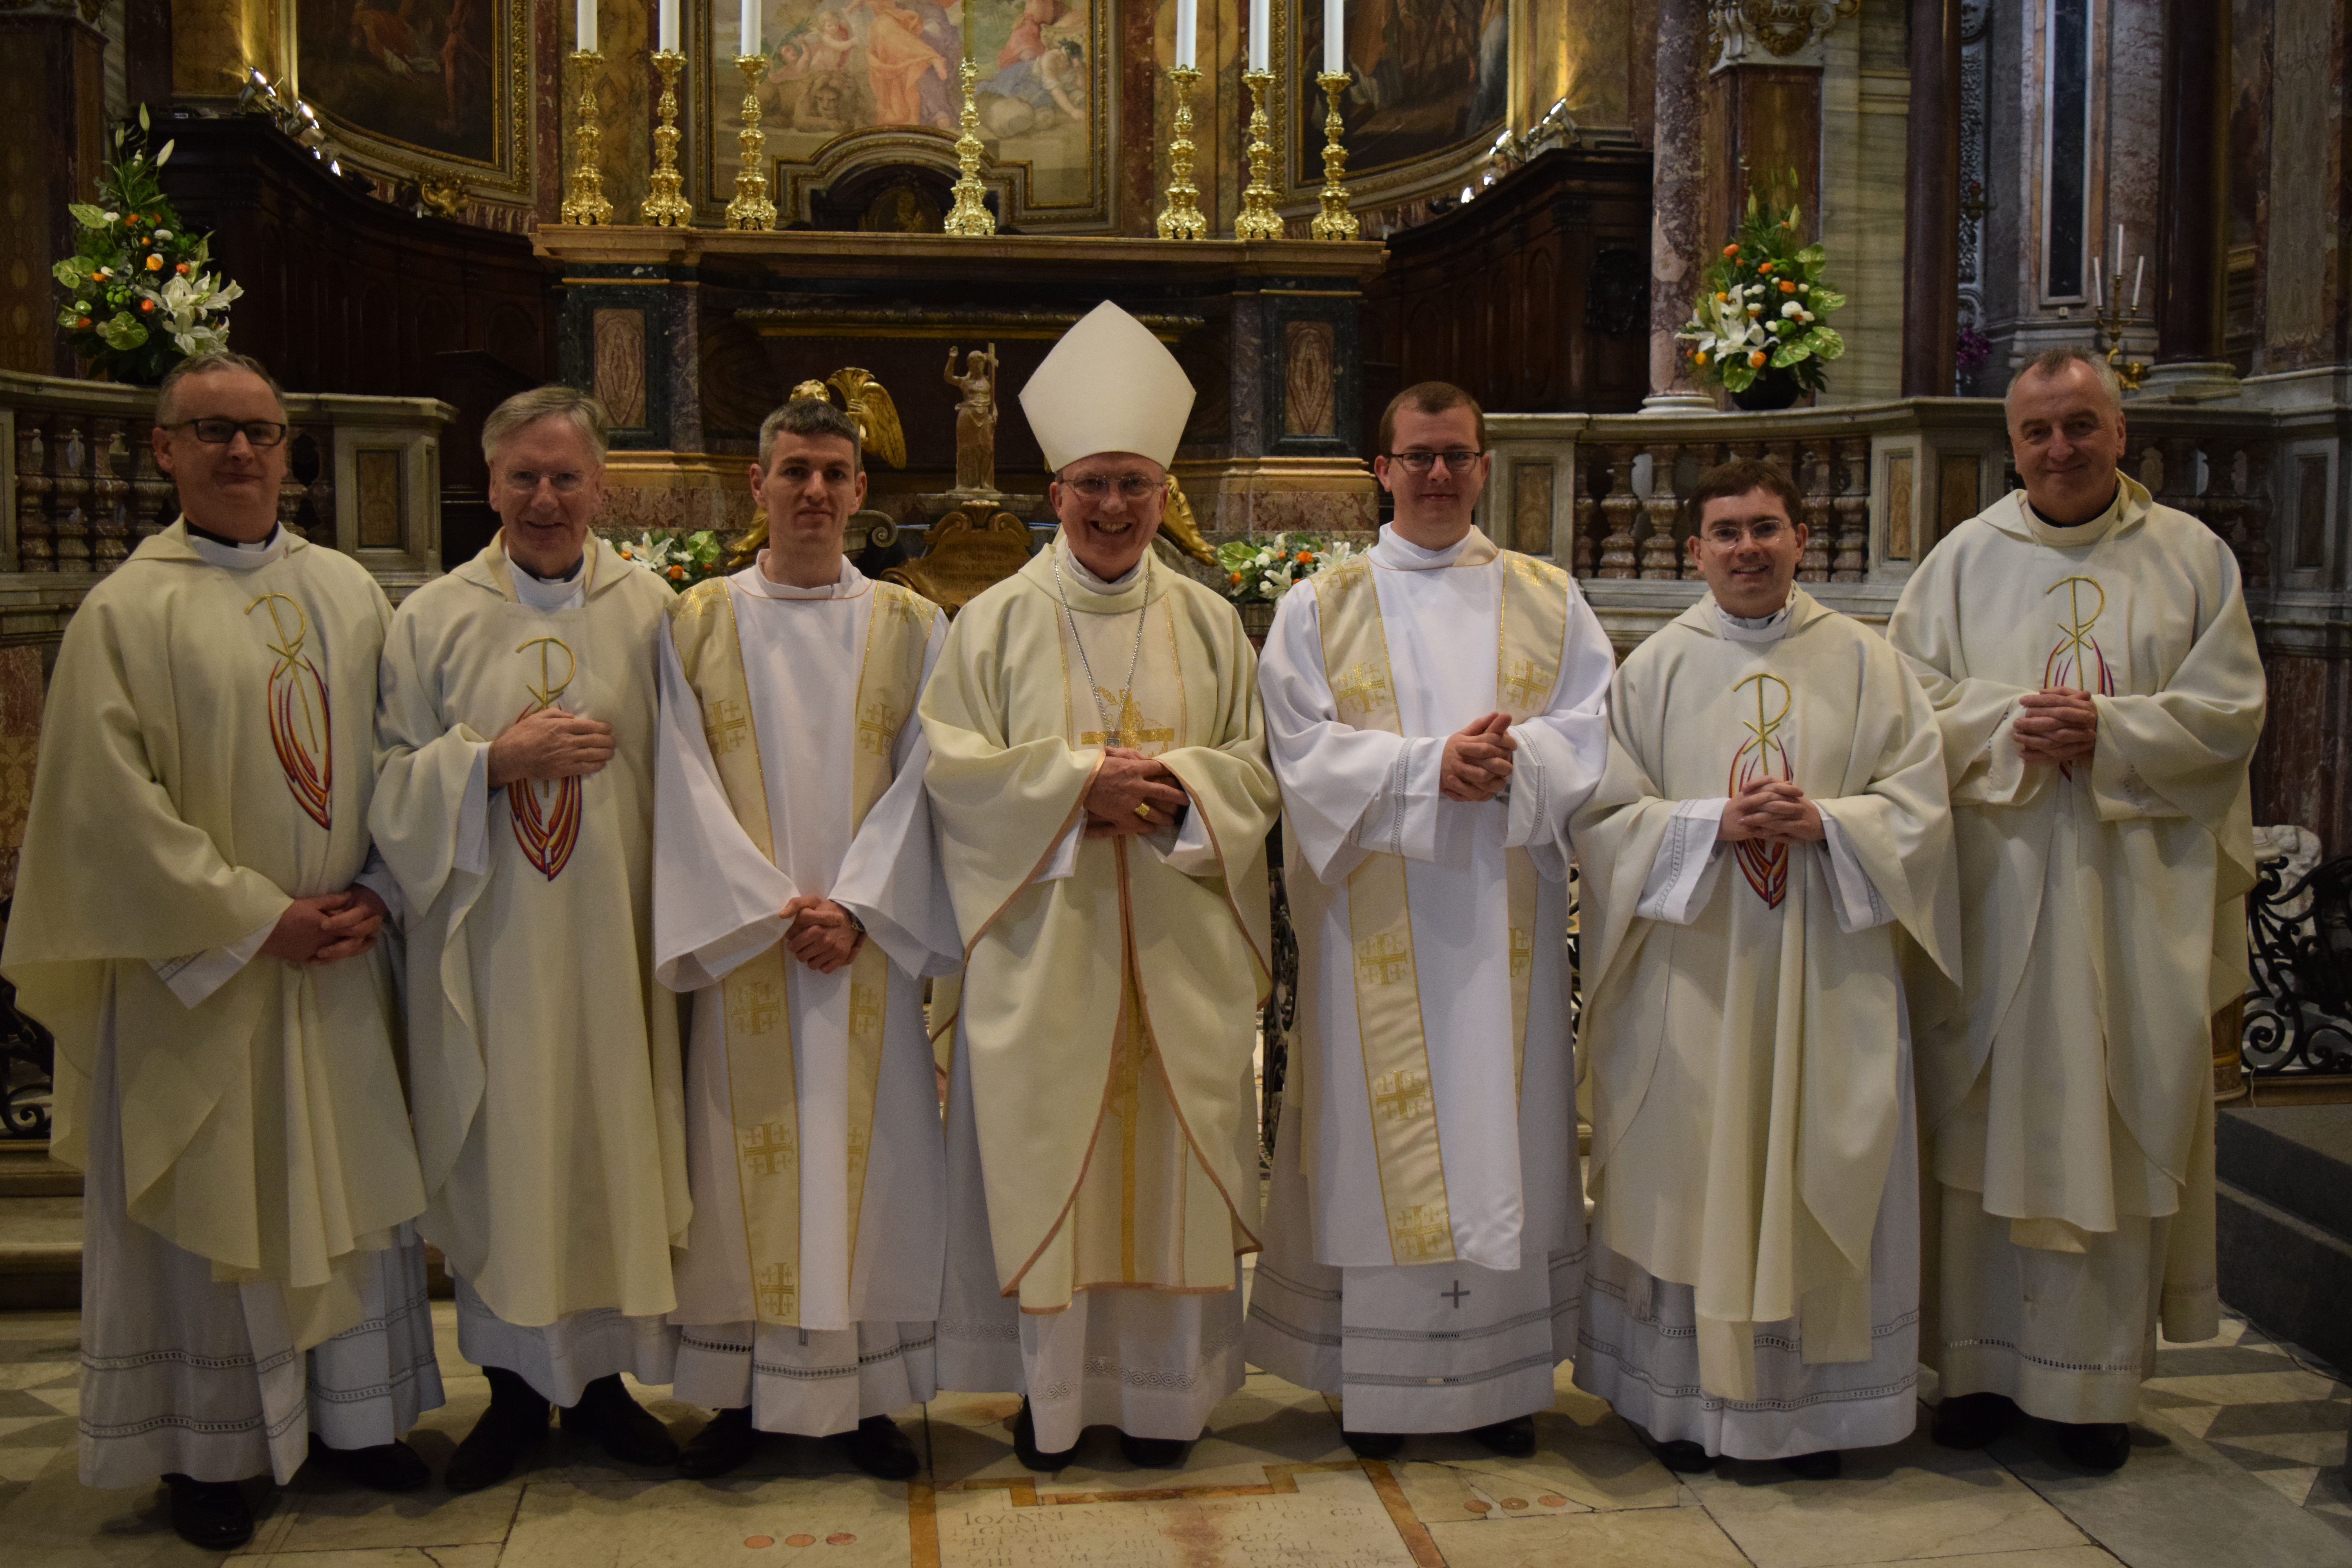 Photo after the ordination shows (left to right): Fr George Hayes (Vice Rector), Fr Thomas Norris (Spiritual Director), Rev. Malachy Gallagher (new Deacon), Bishop Donal McKeown (Bishop of Derry), Rev. Bill O’Shaughnessy (new Deacon), Fr Hugh Clifford (Director of Formation), Mons. Ciarán O’Carroll (Rector).